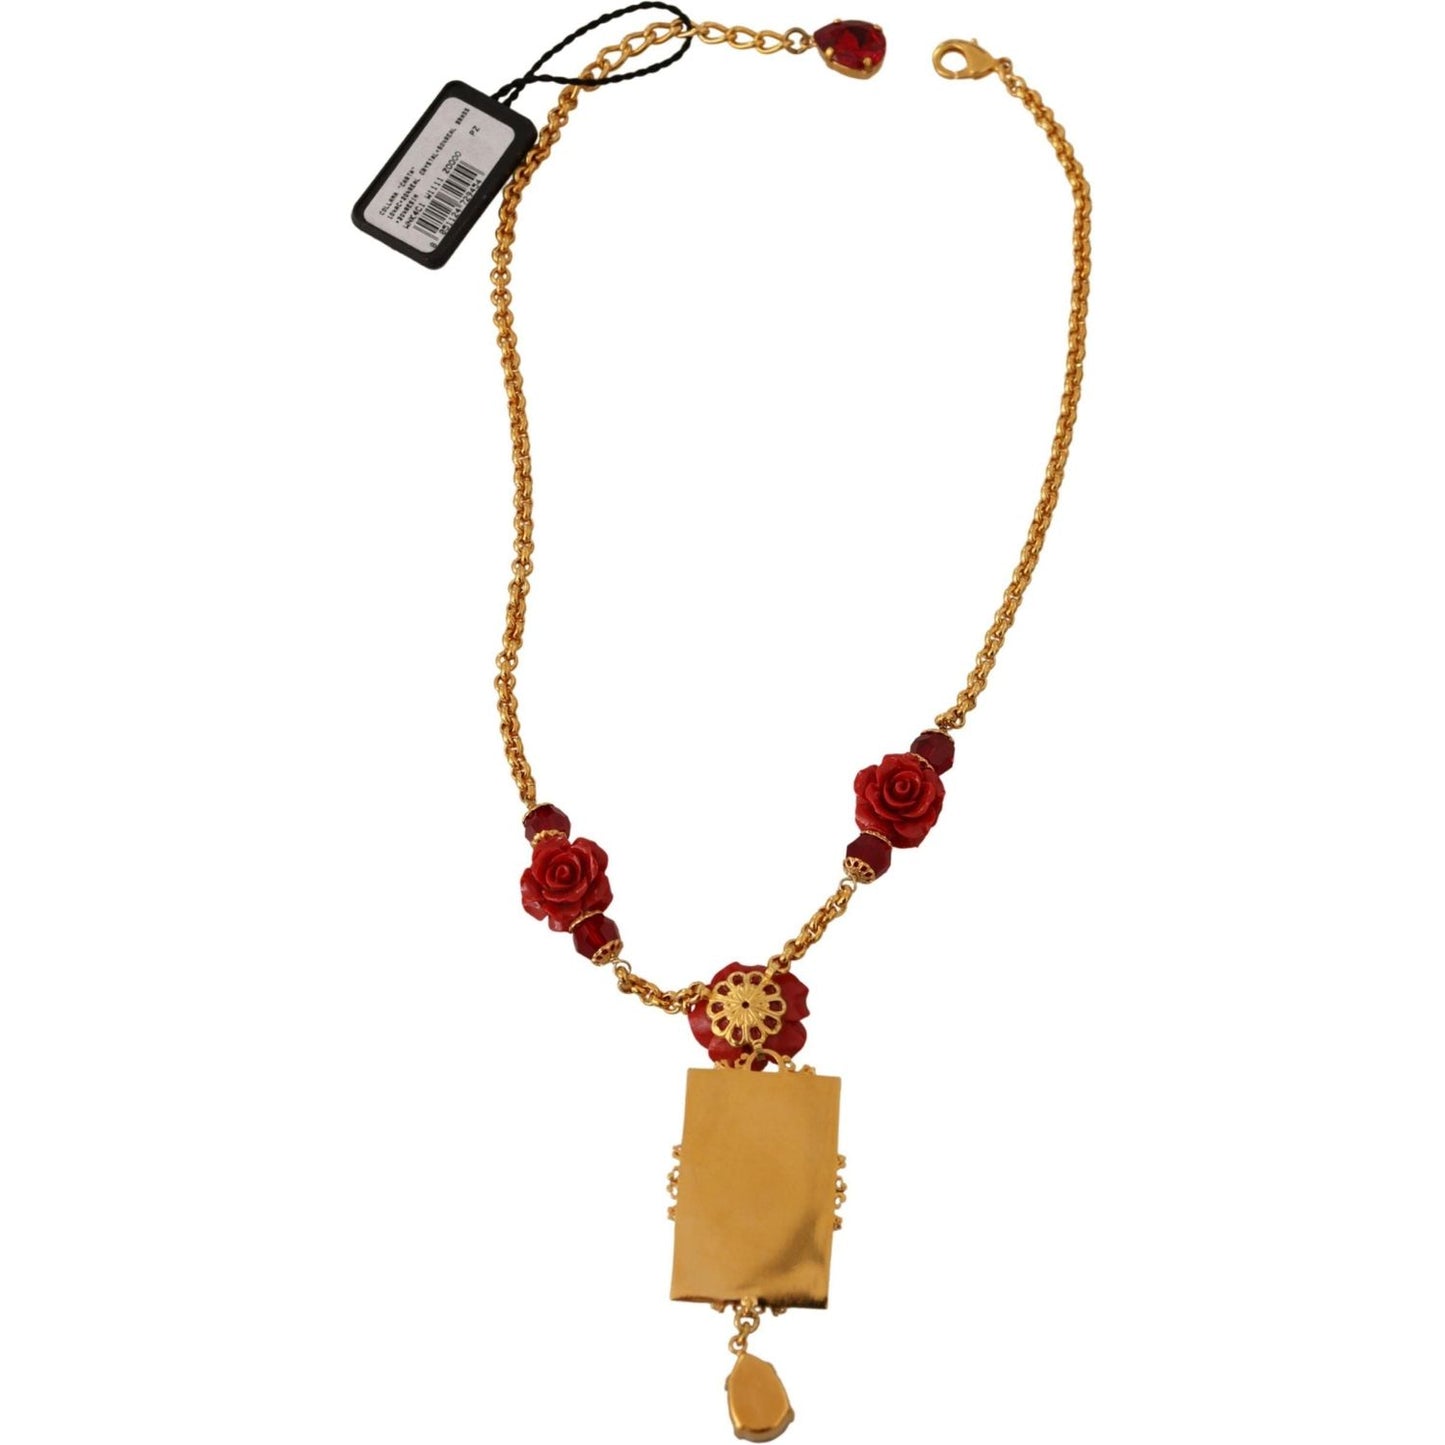 Dolce & Gabbana Gold Tone Charm Necklace with Crystal Pendant gold-brass-flower-card-deck-crystal-pendant-necklace